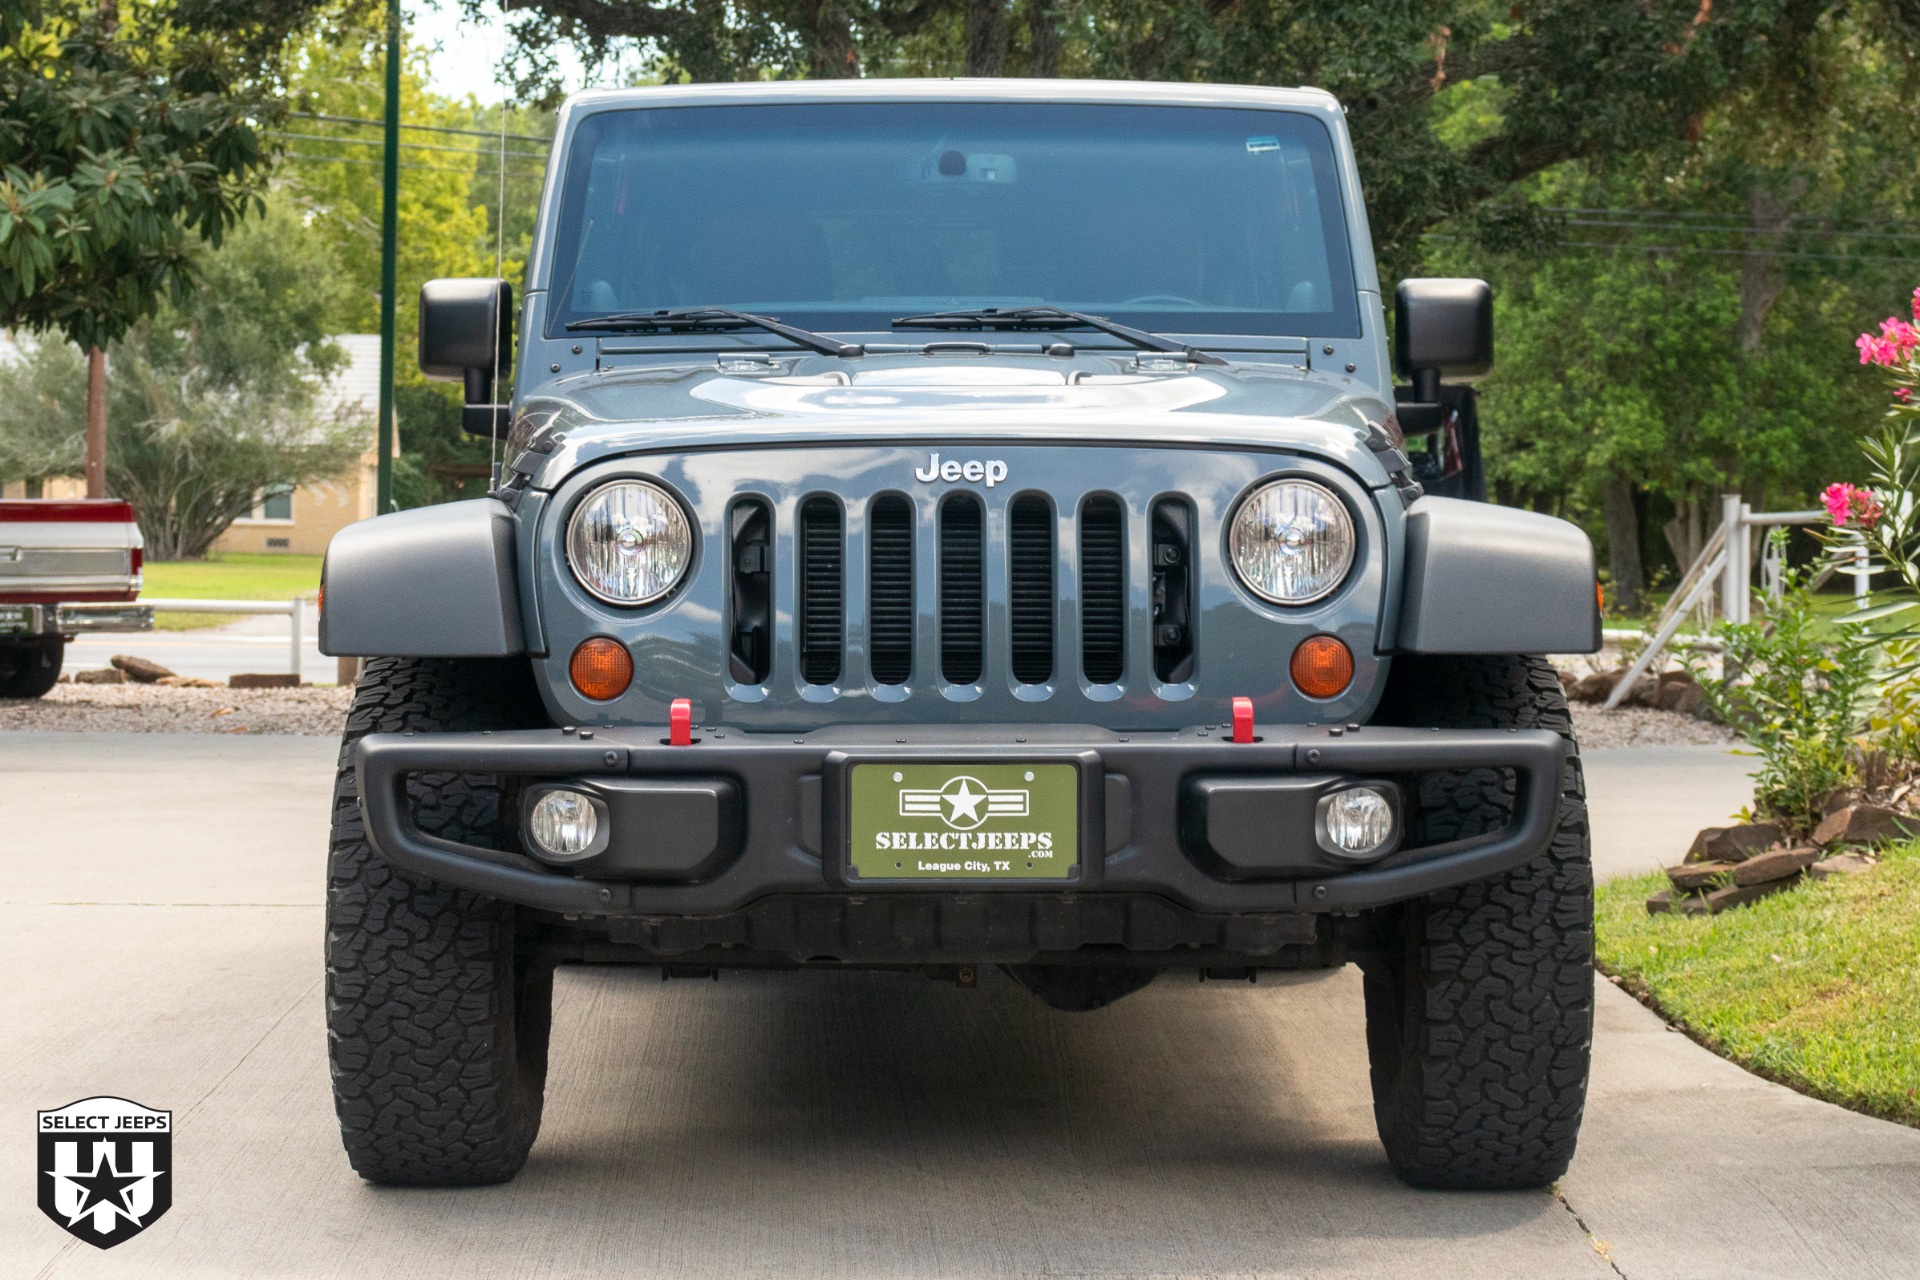 Used-2013-Jeep-Wrangler-Unlimited-Rubicon-10th-Anniversary